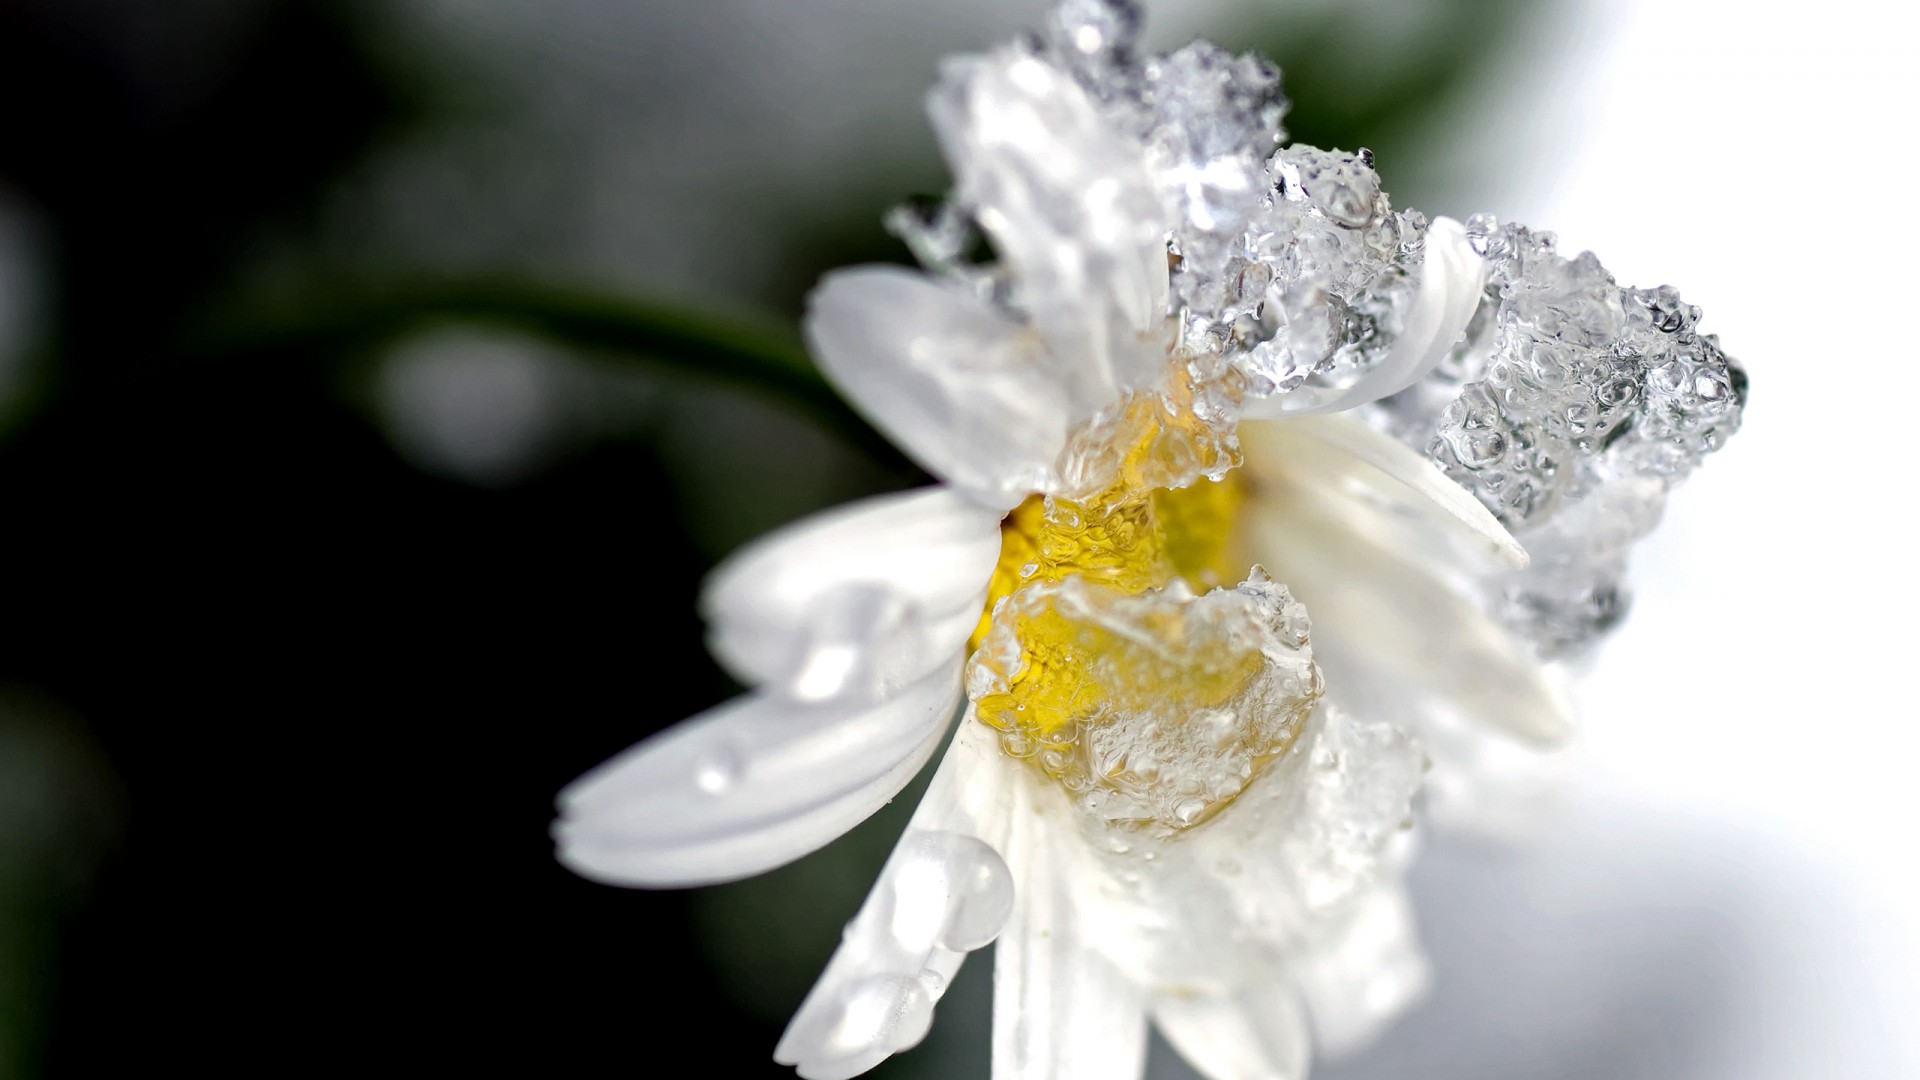 Winter Flower Pictures - Wallpaper, High Definition, High Quality ...